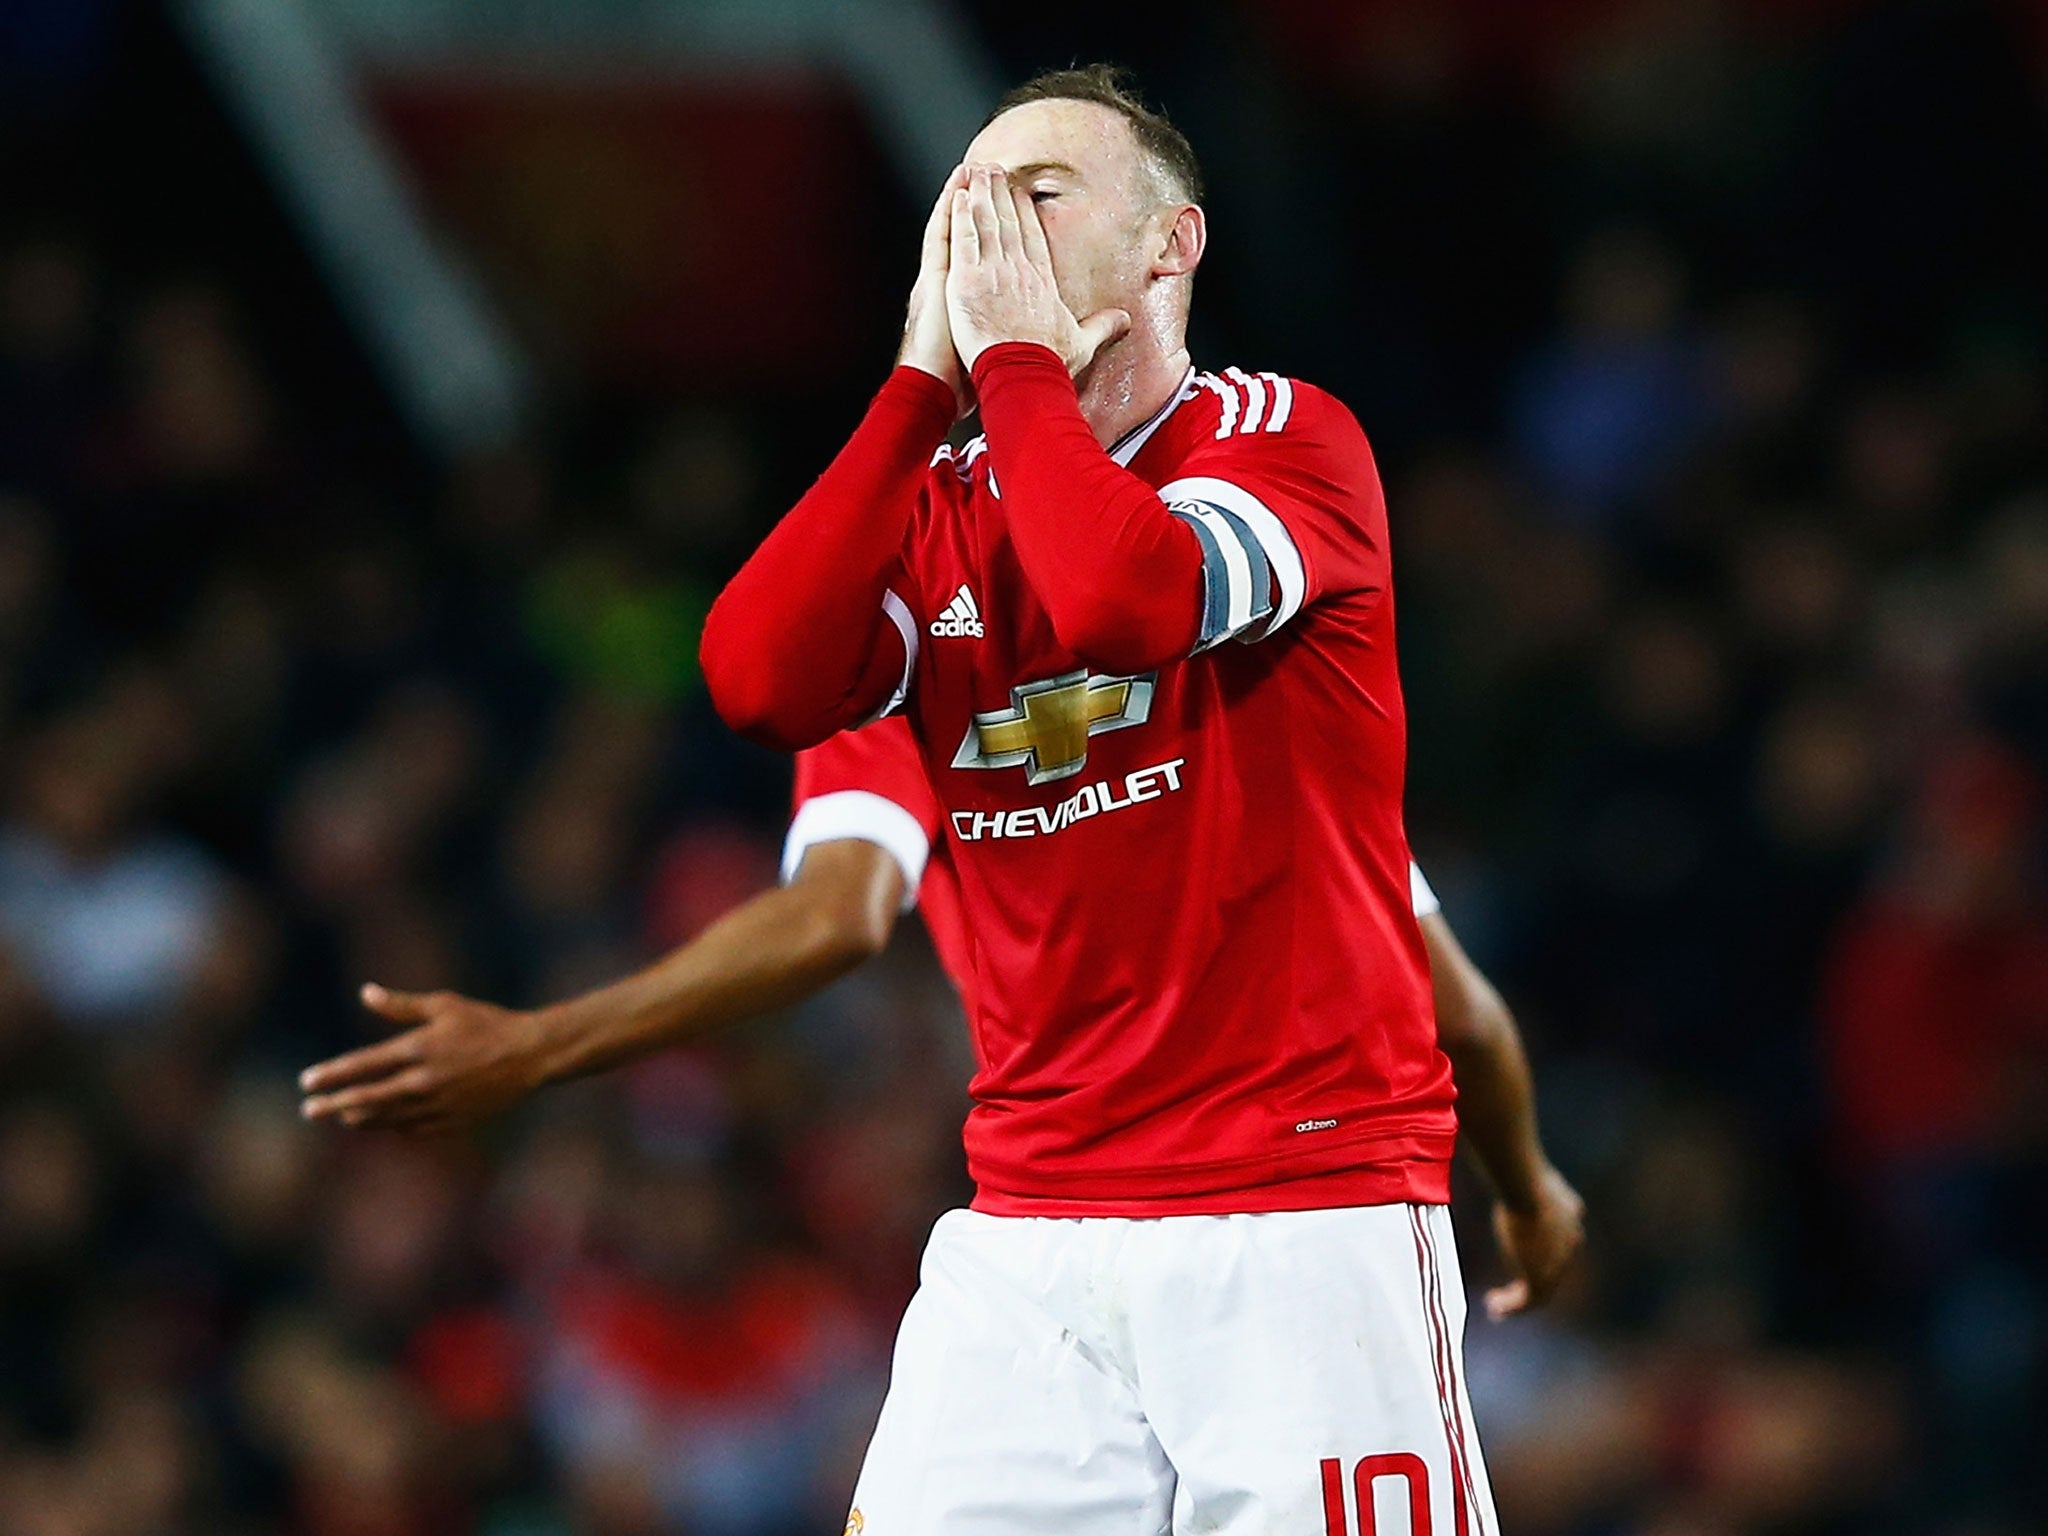 Wayne Rooney reacts after missing a chance for Manchester United